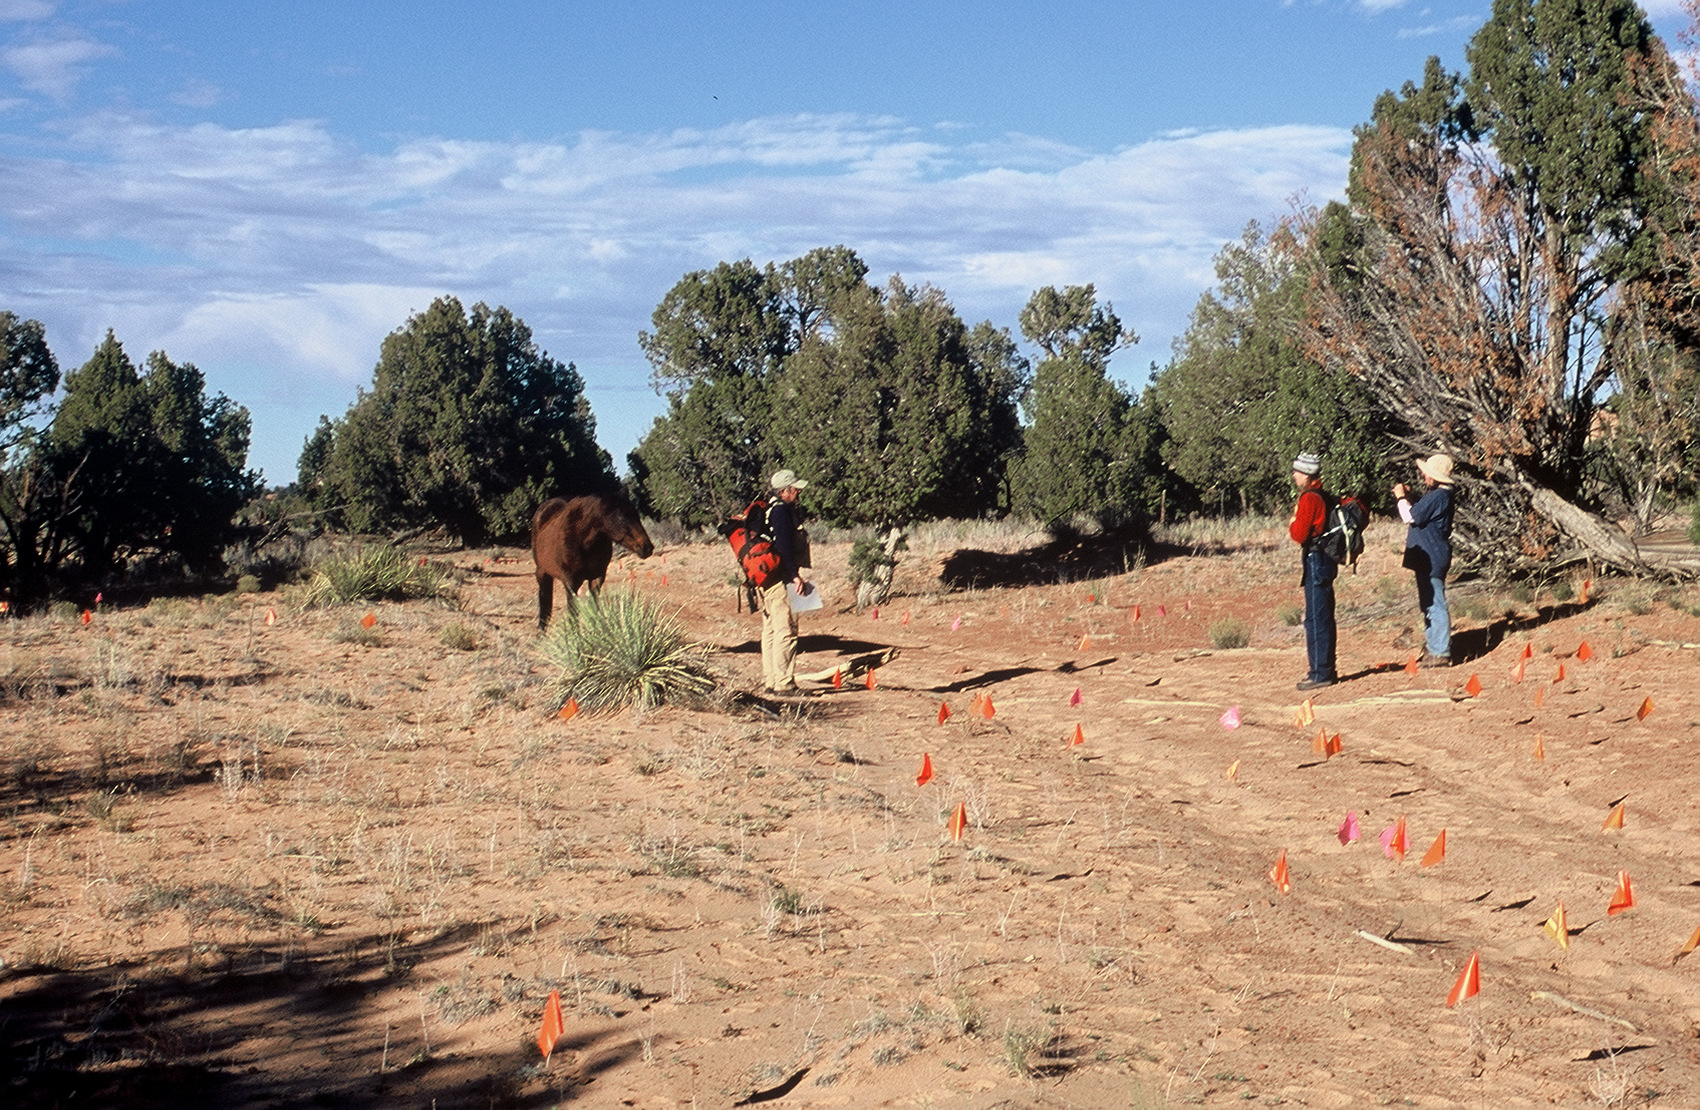 Survey team finds unprotected artifacts in the middle of a vehicle track. Photo/Jill Ozarski.